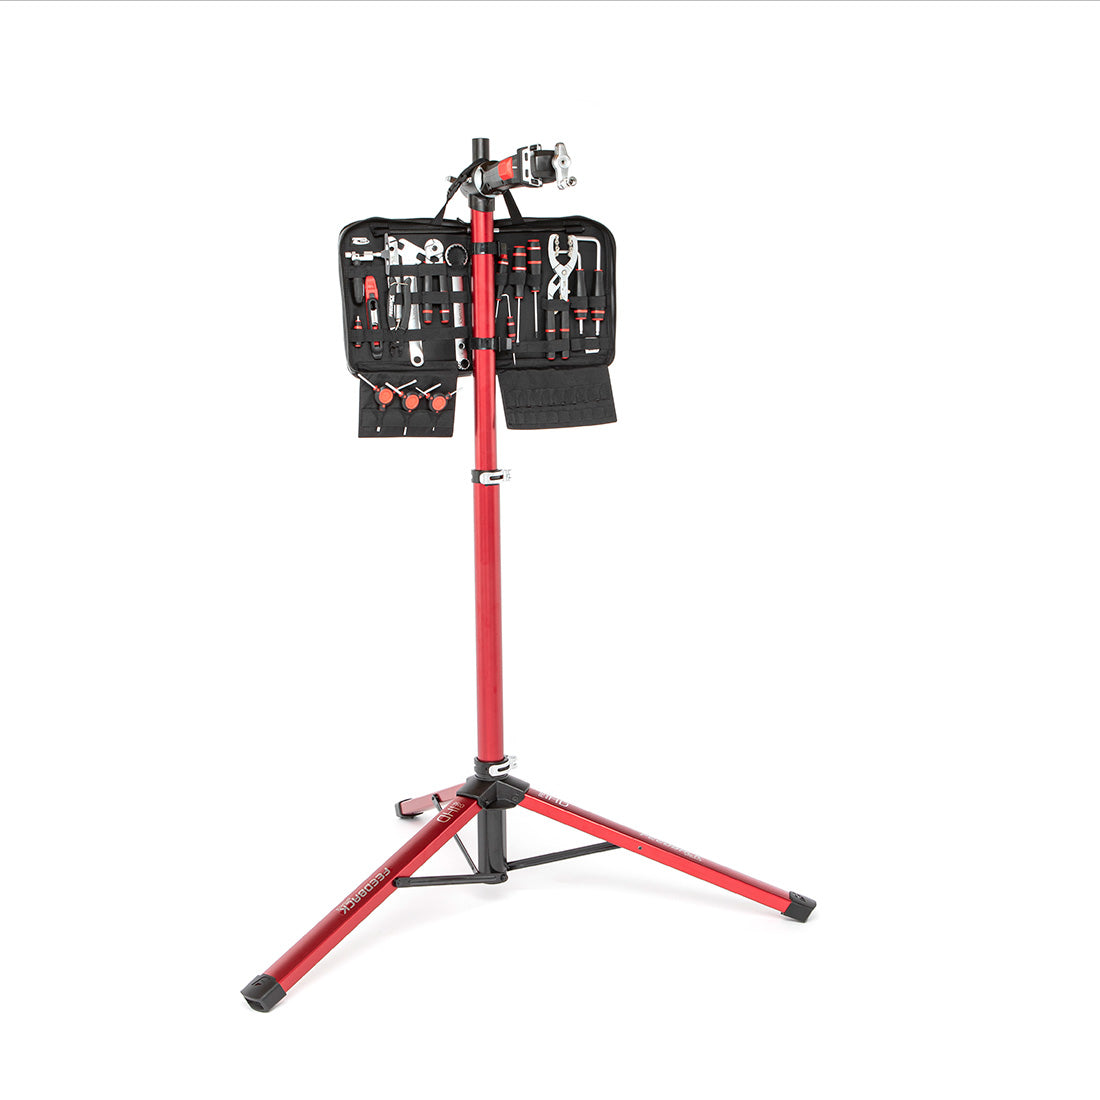 feedback sports team edition toolkit hanging on a feedback repair stand